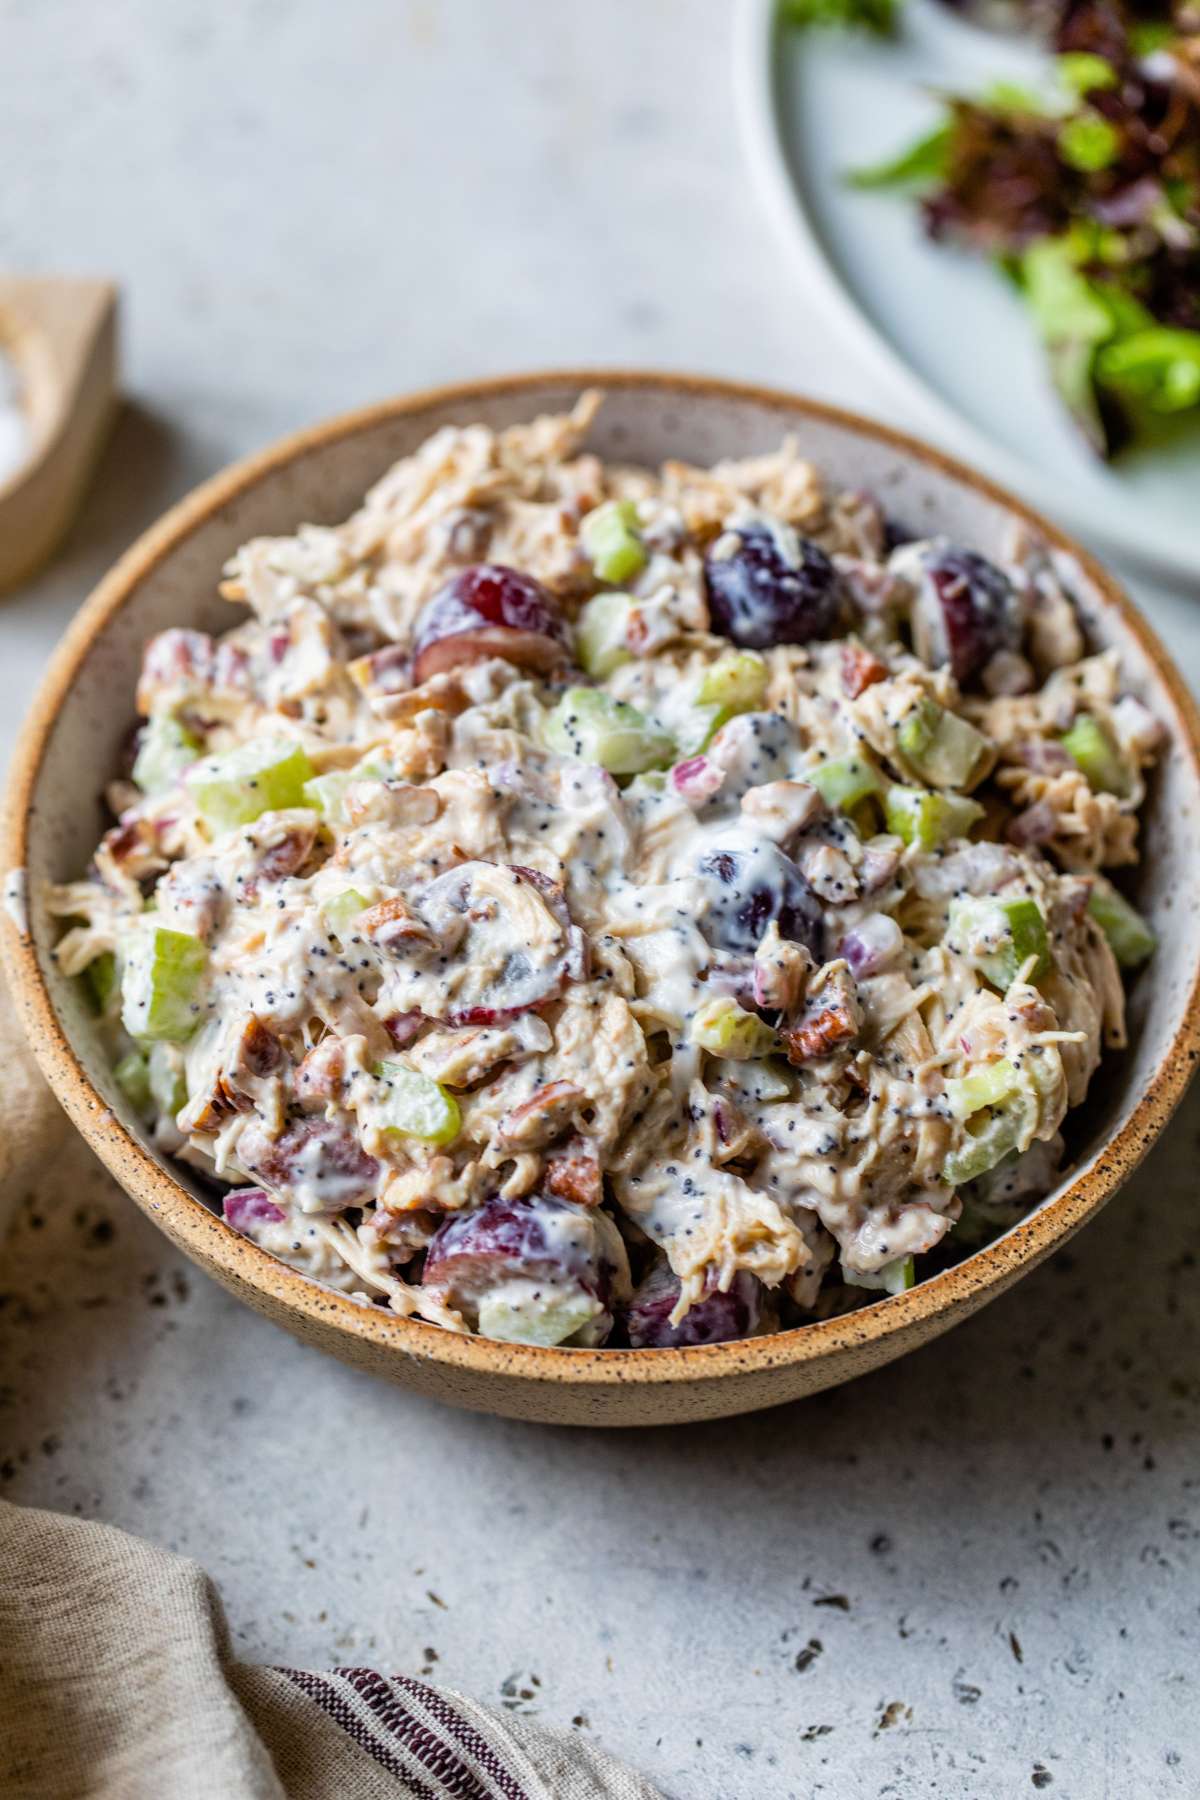 Sonoma chicken salad with grapes and pecans in a bowl.